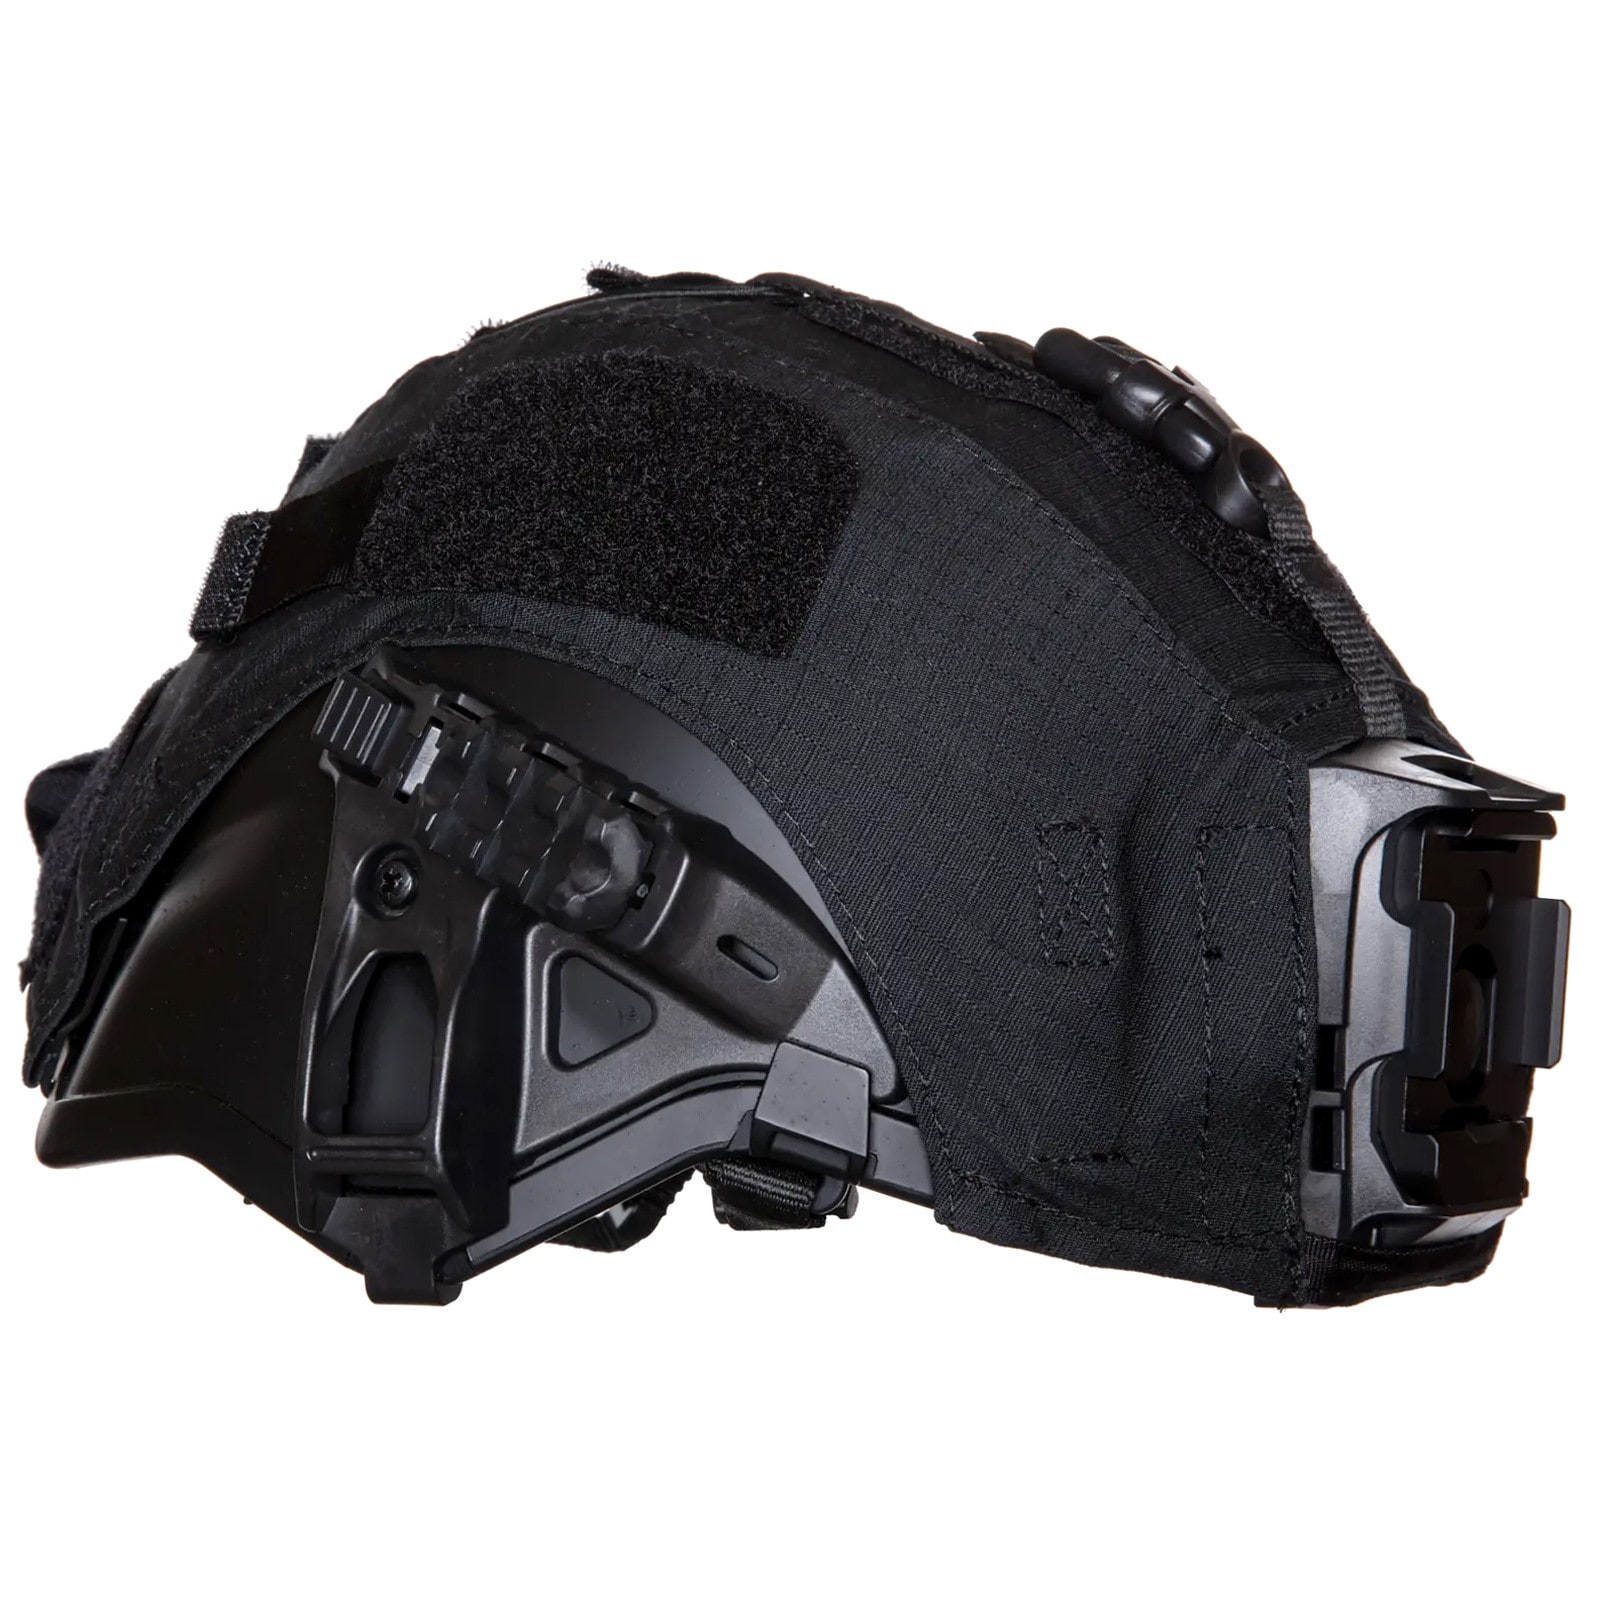 Hełm ASG FMA Integrated Head Protection System - Black